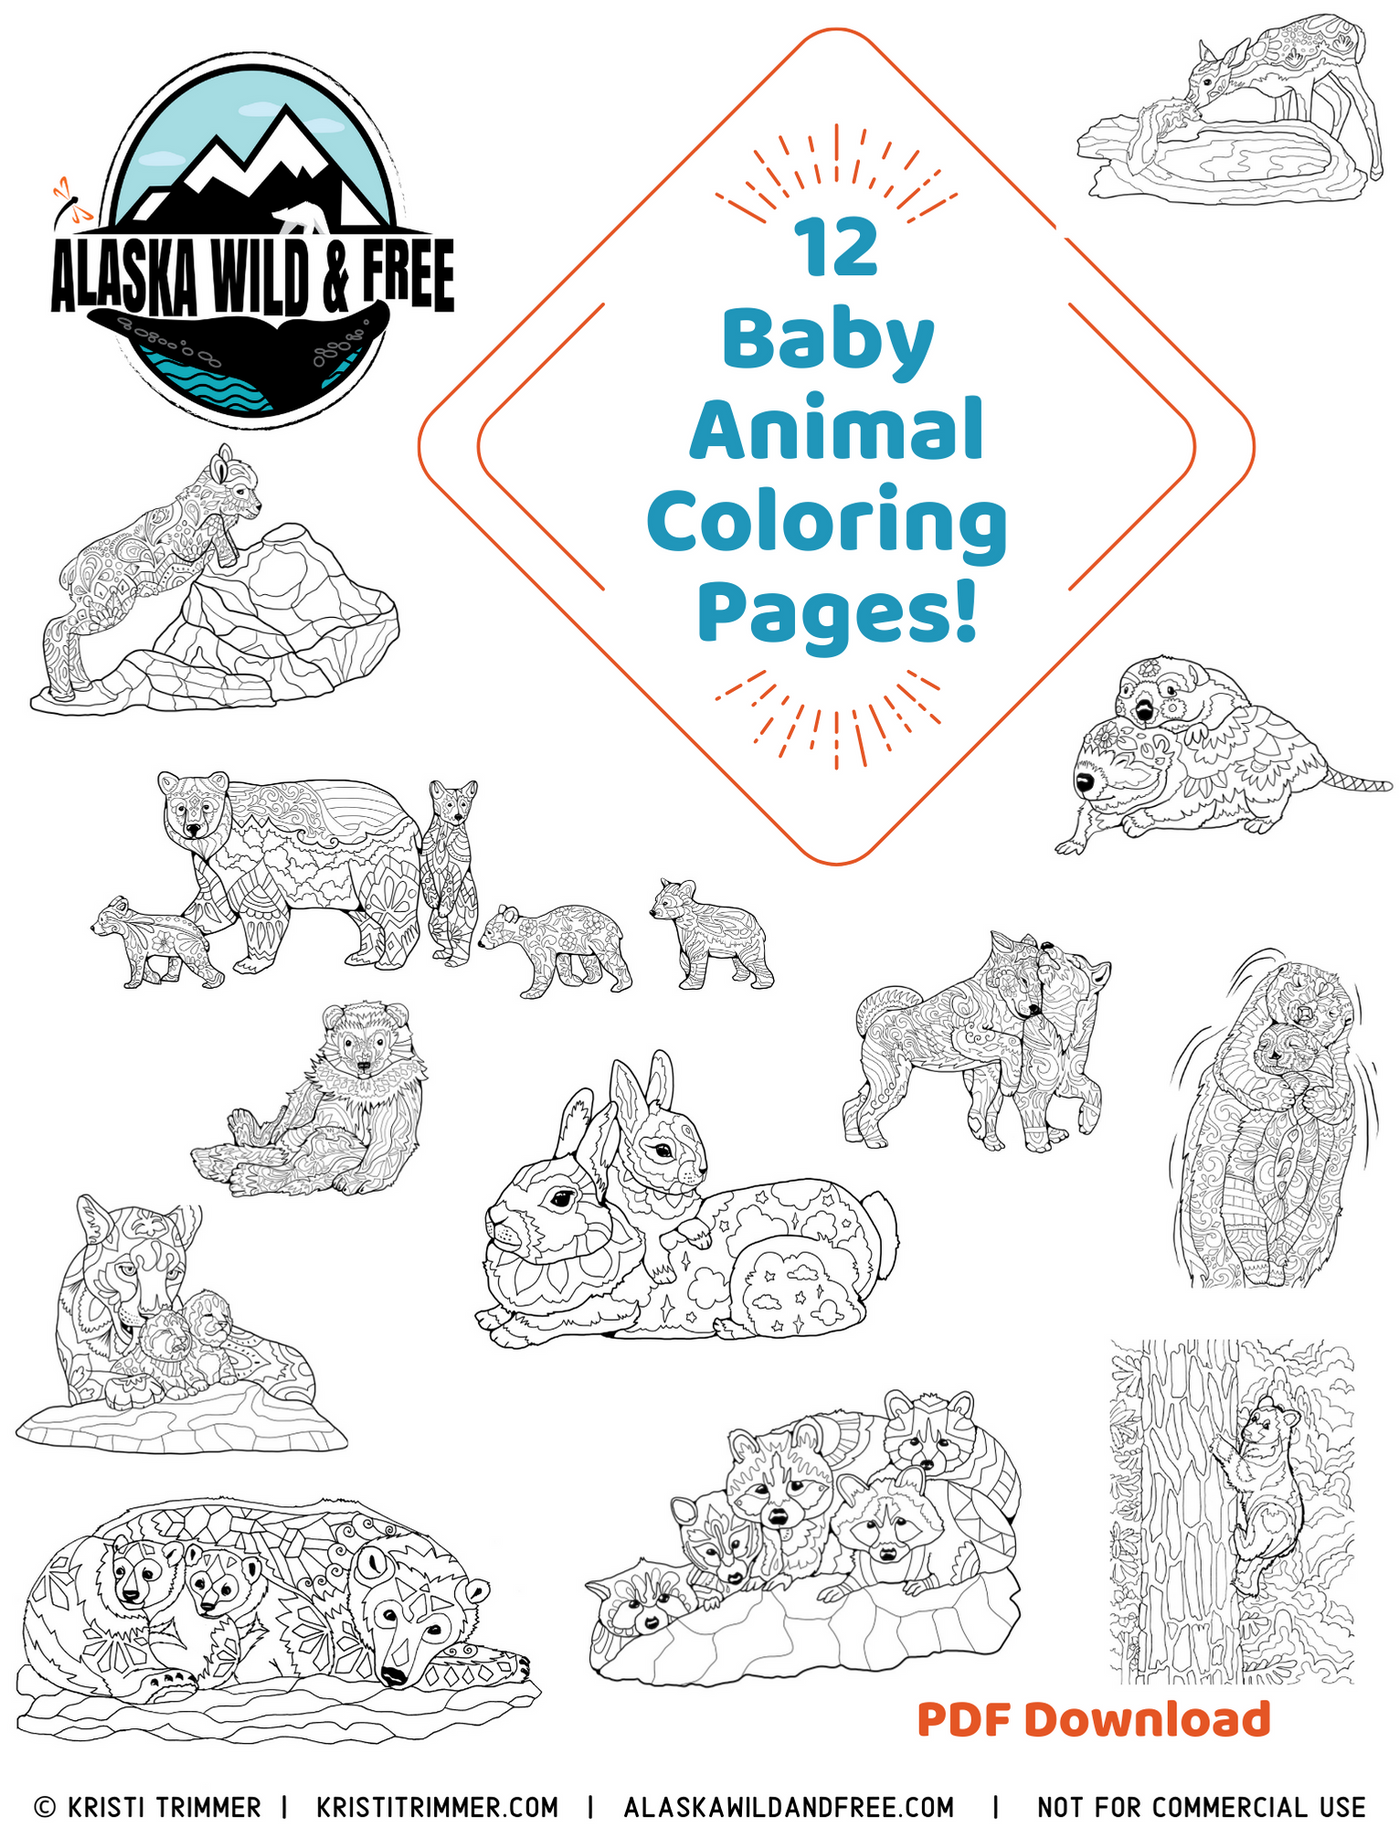 Color: Baby Animal Coloring Pages – Alaska Wild & Free